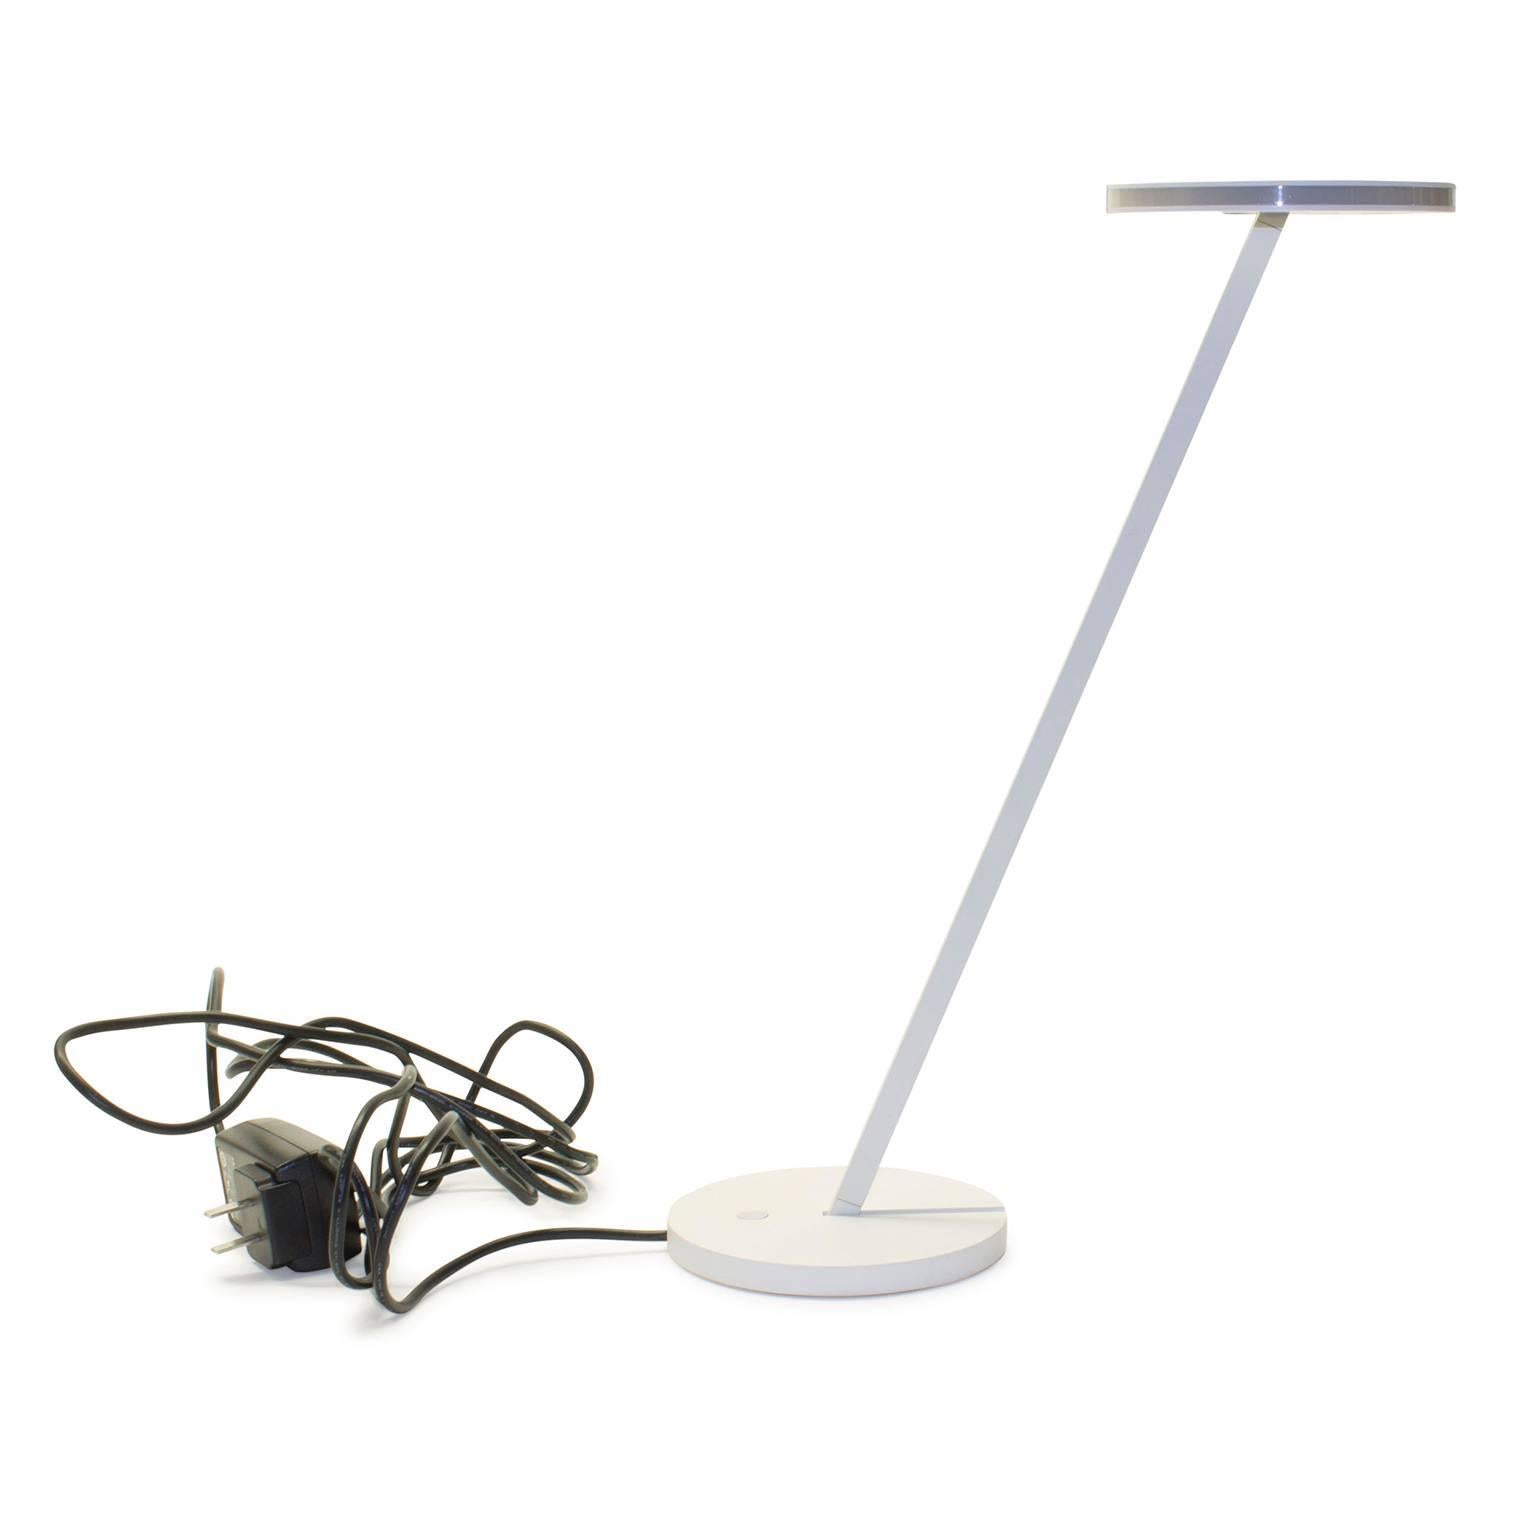 The Itis table lamp is designed for direct task and diffused LED lighting. Itis has been re-engineered using a stronger LED, resulting in a twenty percent increase in light output. Itis is composed of a painted zamac base with a painted metal stem.